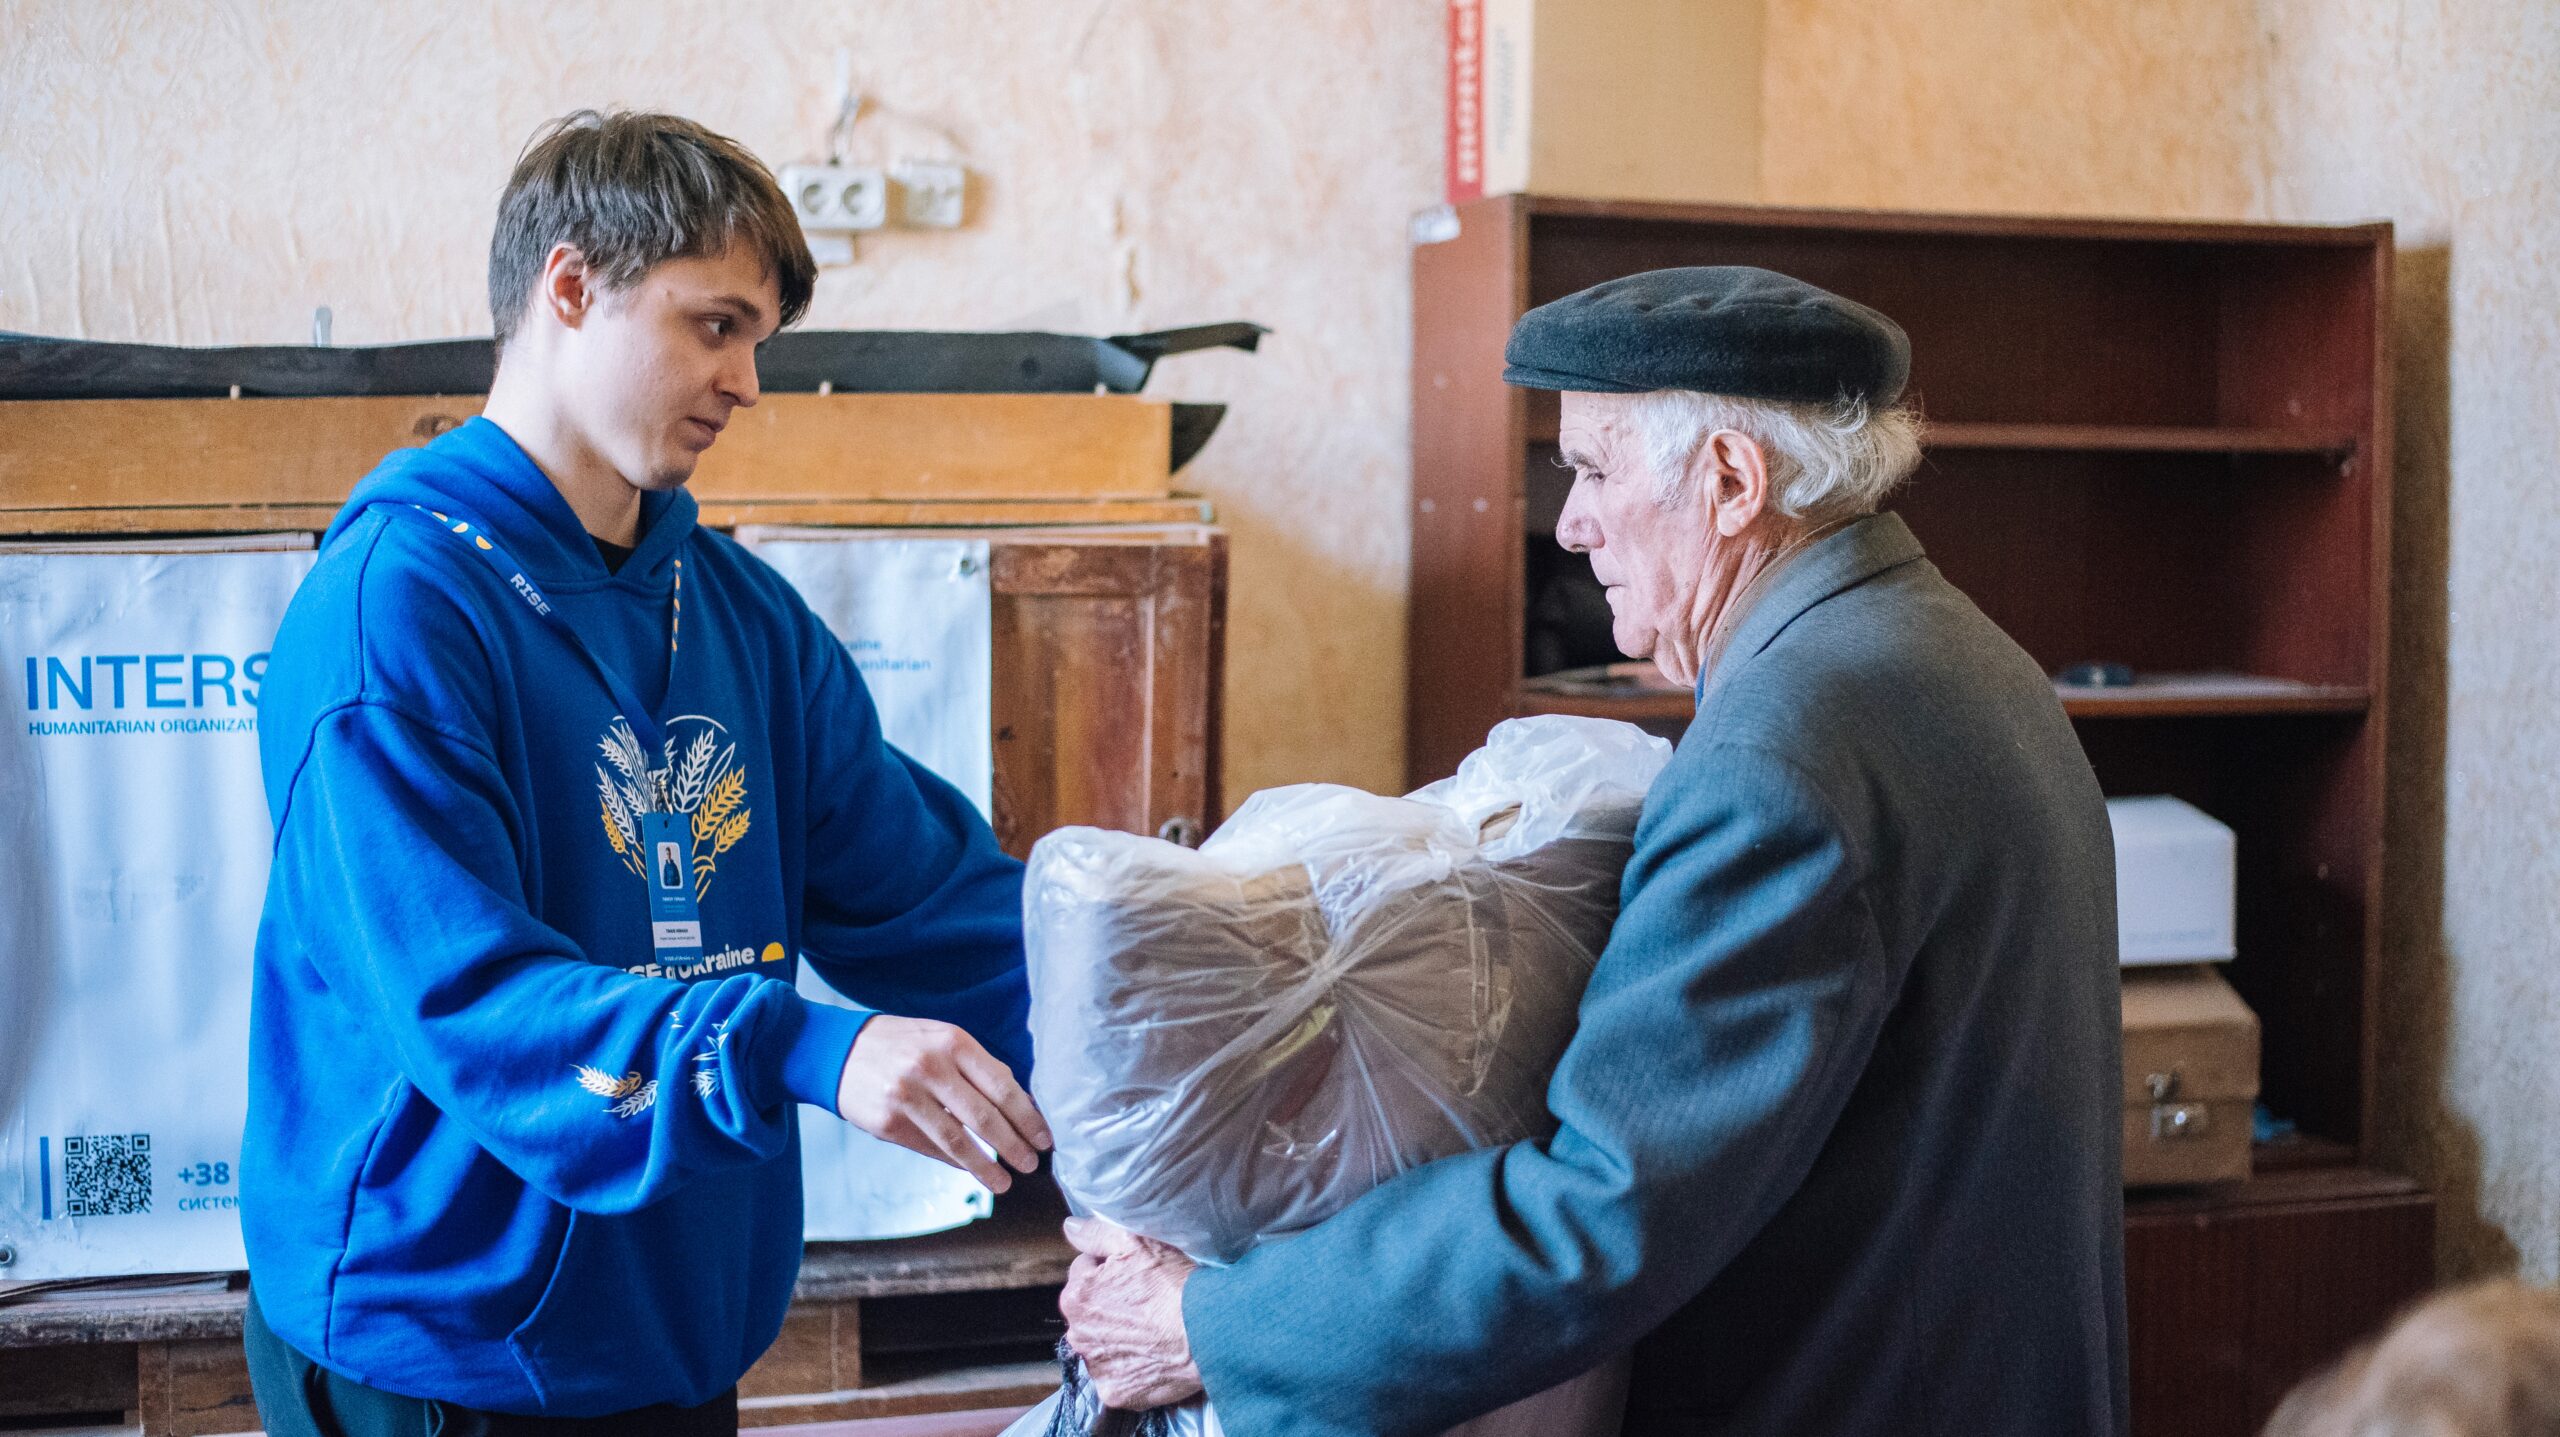 Report on the project “Provision of emergency insulation assistance to vulnerable households in hard-to-reach areas of the Dnipro region” in partnership with the humanitarian organisation INTERSOS - Rise of Ukraine